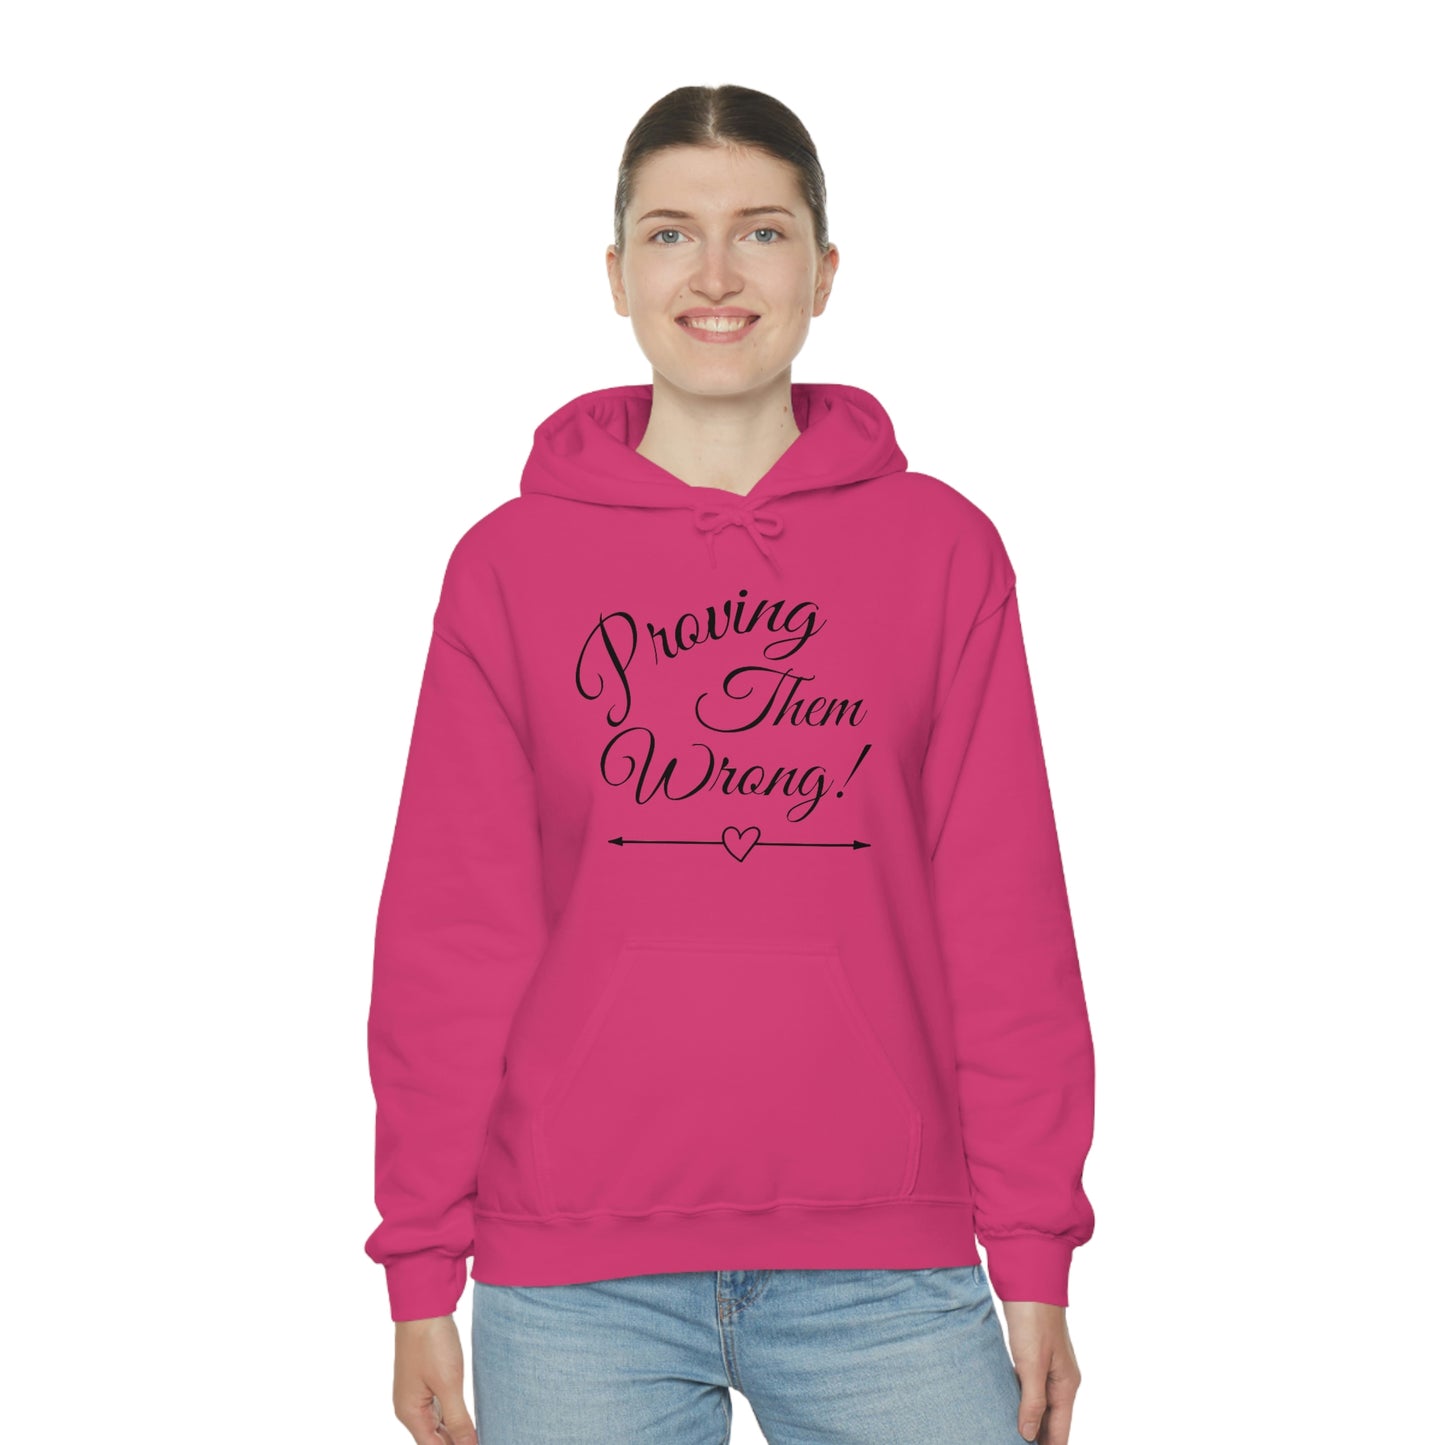 ‘Proving Them Wrong’ Printed Front & Back   Unisex Heavy Blend™ Hooded Sweatshirt